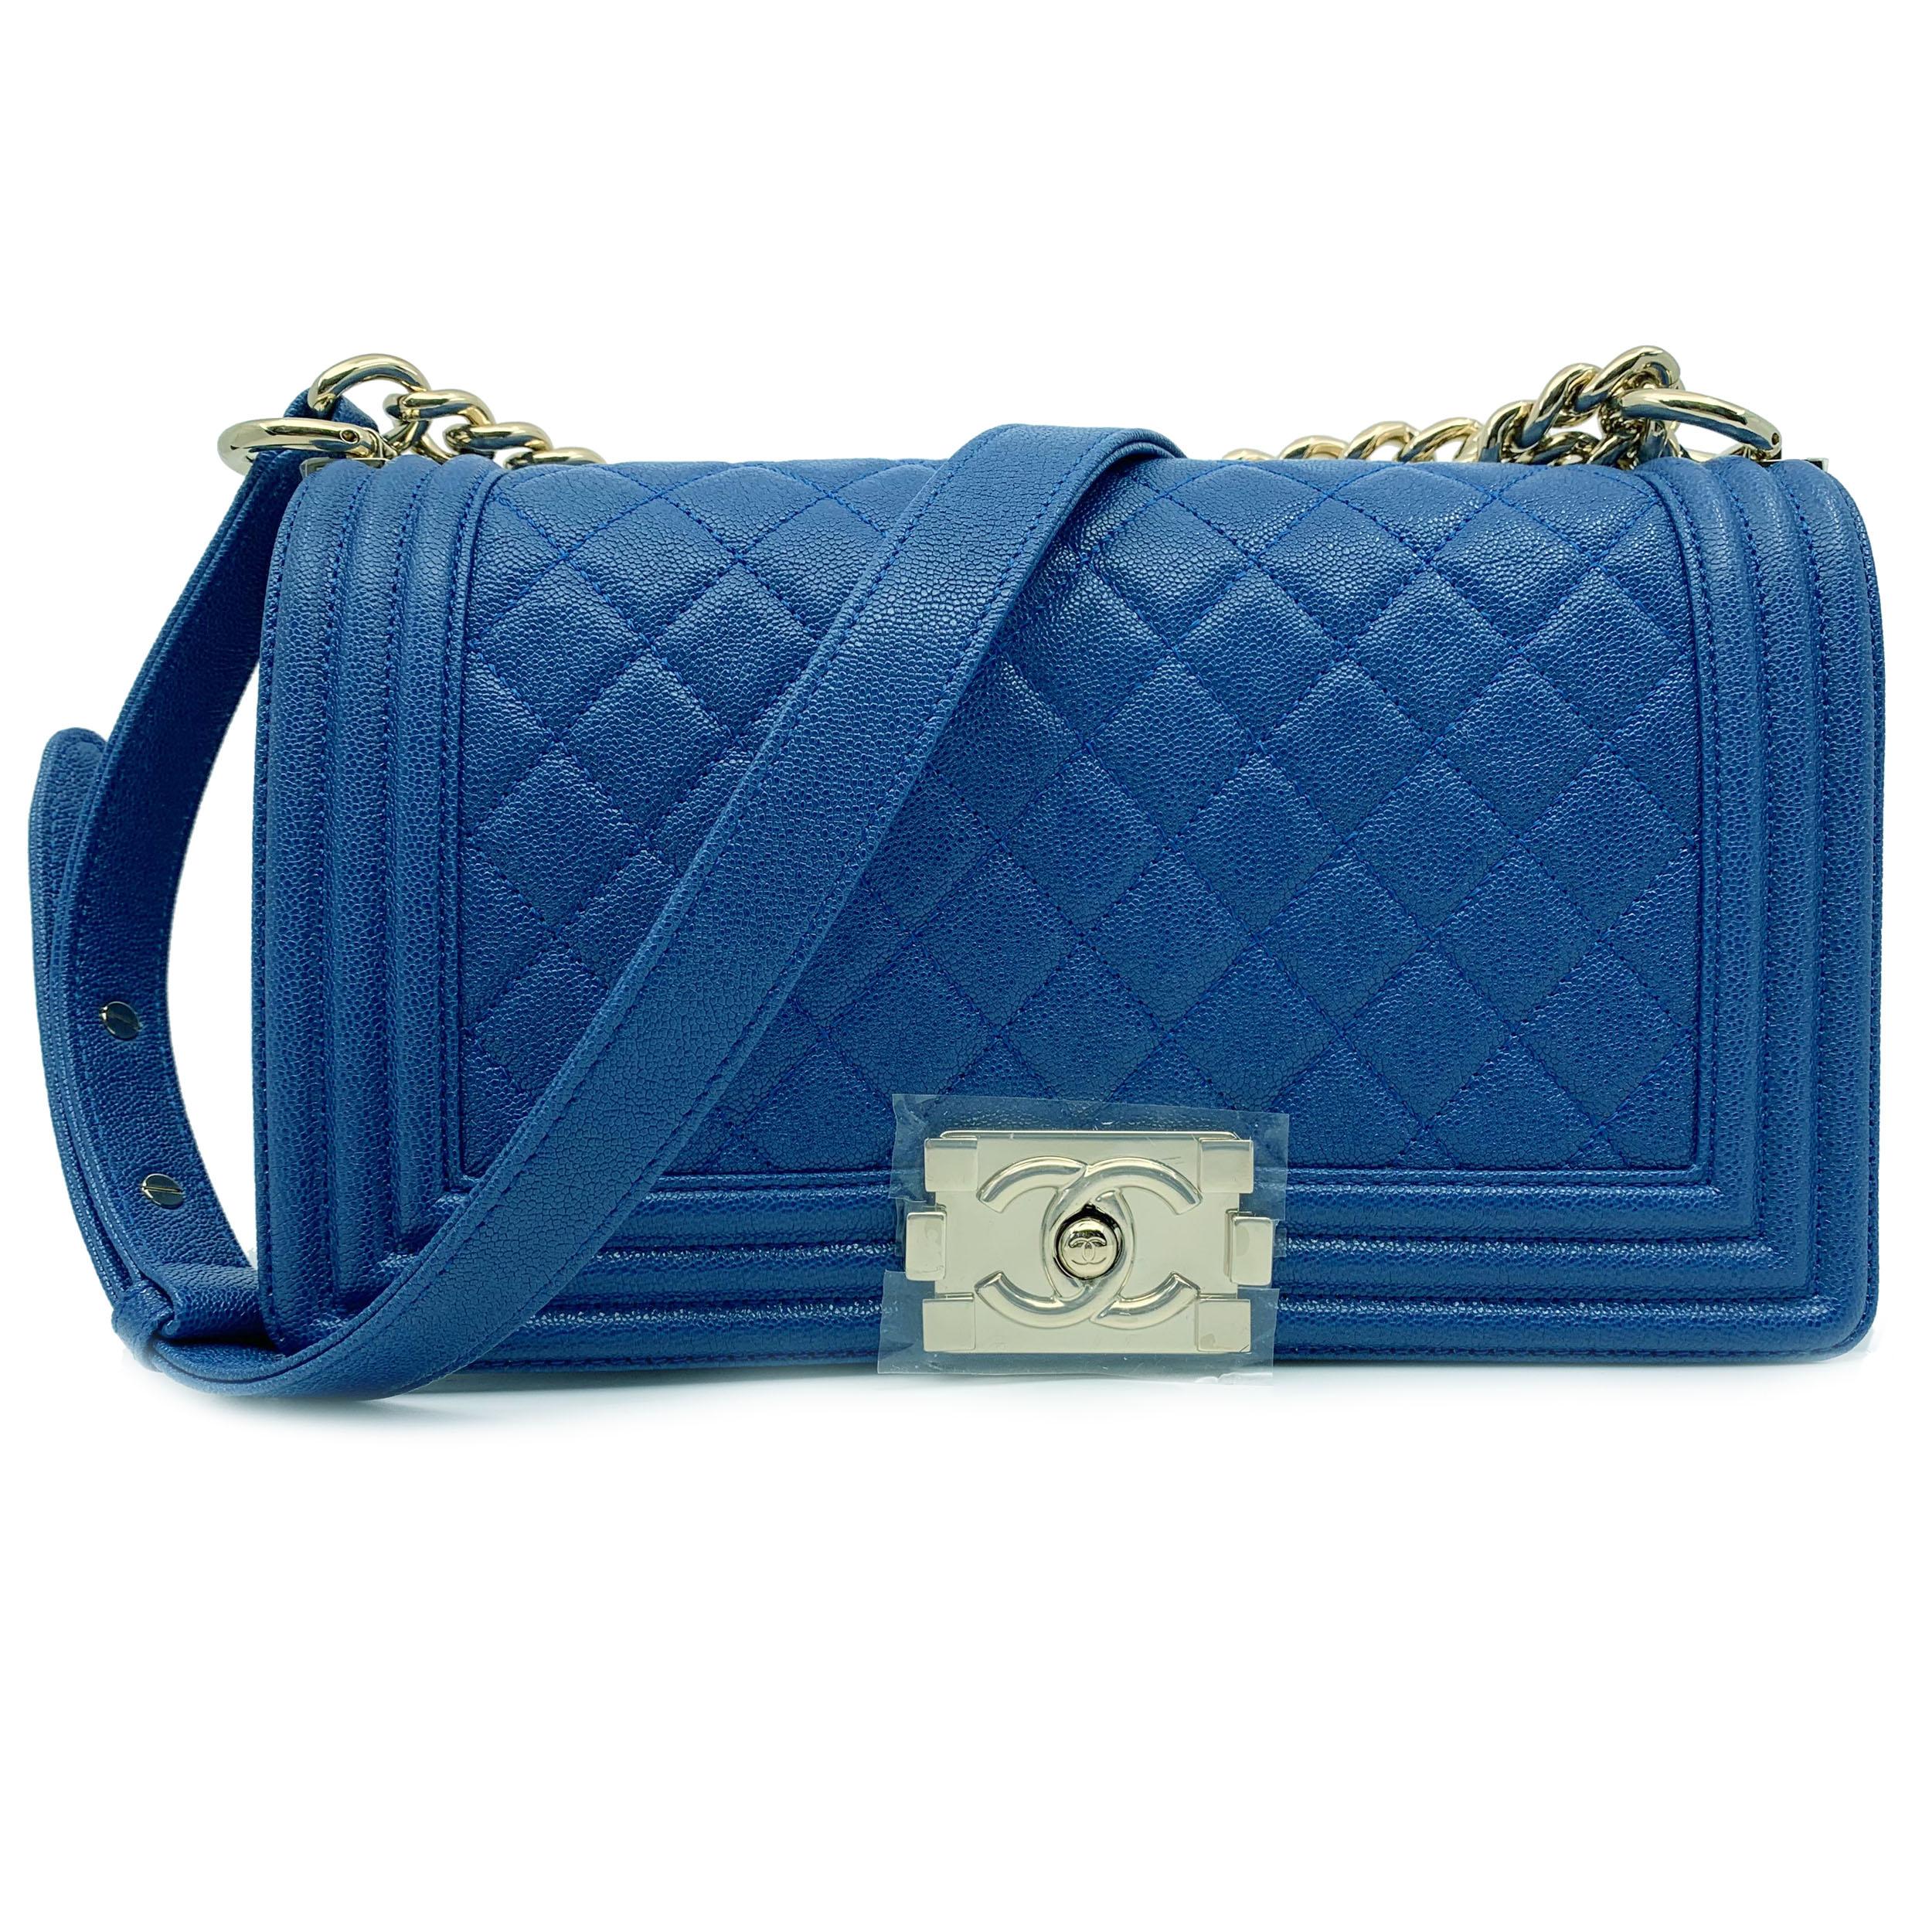 Very rare! Impeccable!

Chanel Boy Gold Tone Chain leather Blue Shoulder Ladies Bag A67086 B00317 N090

Comes Without Dust Bag.
Tags are attached. 
Champagne/Gold Color Hardware.
Strap: 20.5 inch 
Measurements: 10 inch x 6 inch x 2.75 inch
With box.